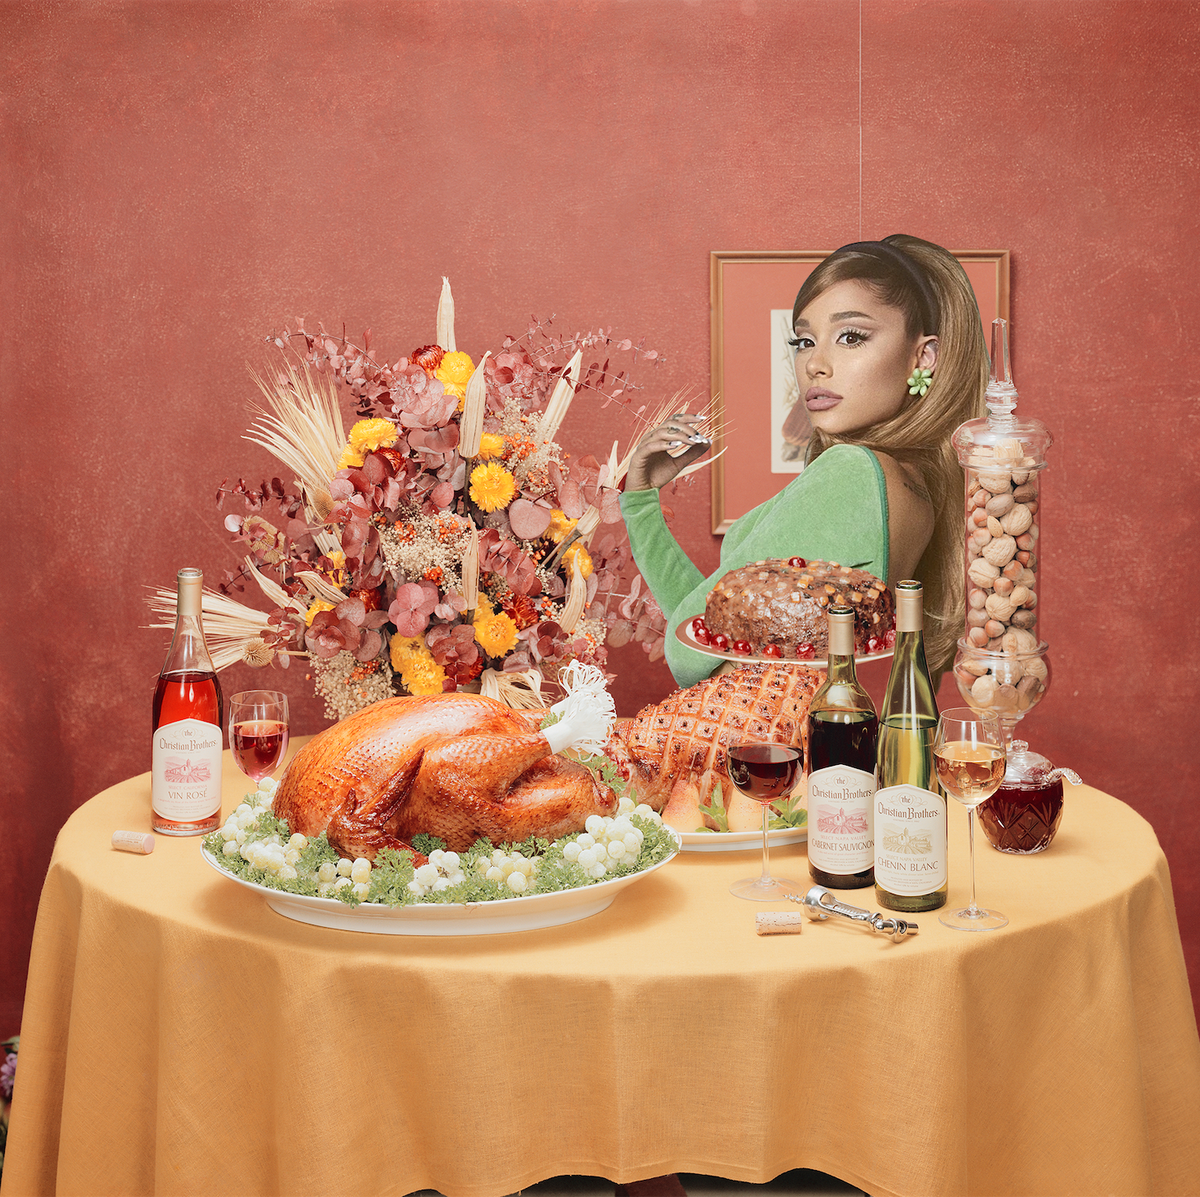 ariana grande sitting at a thanksgiving dinner table